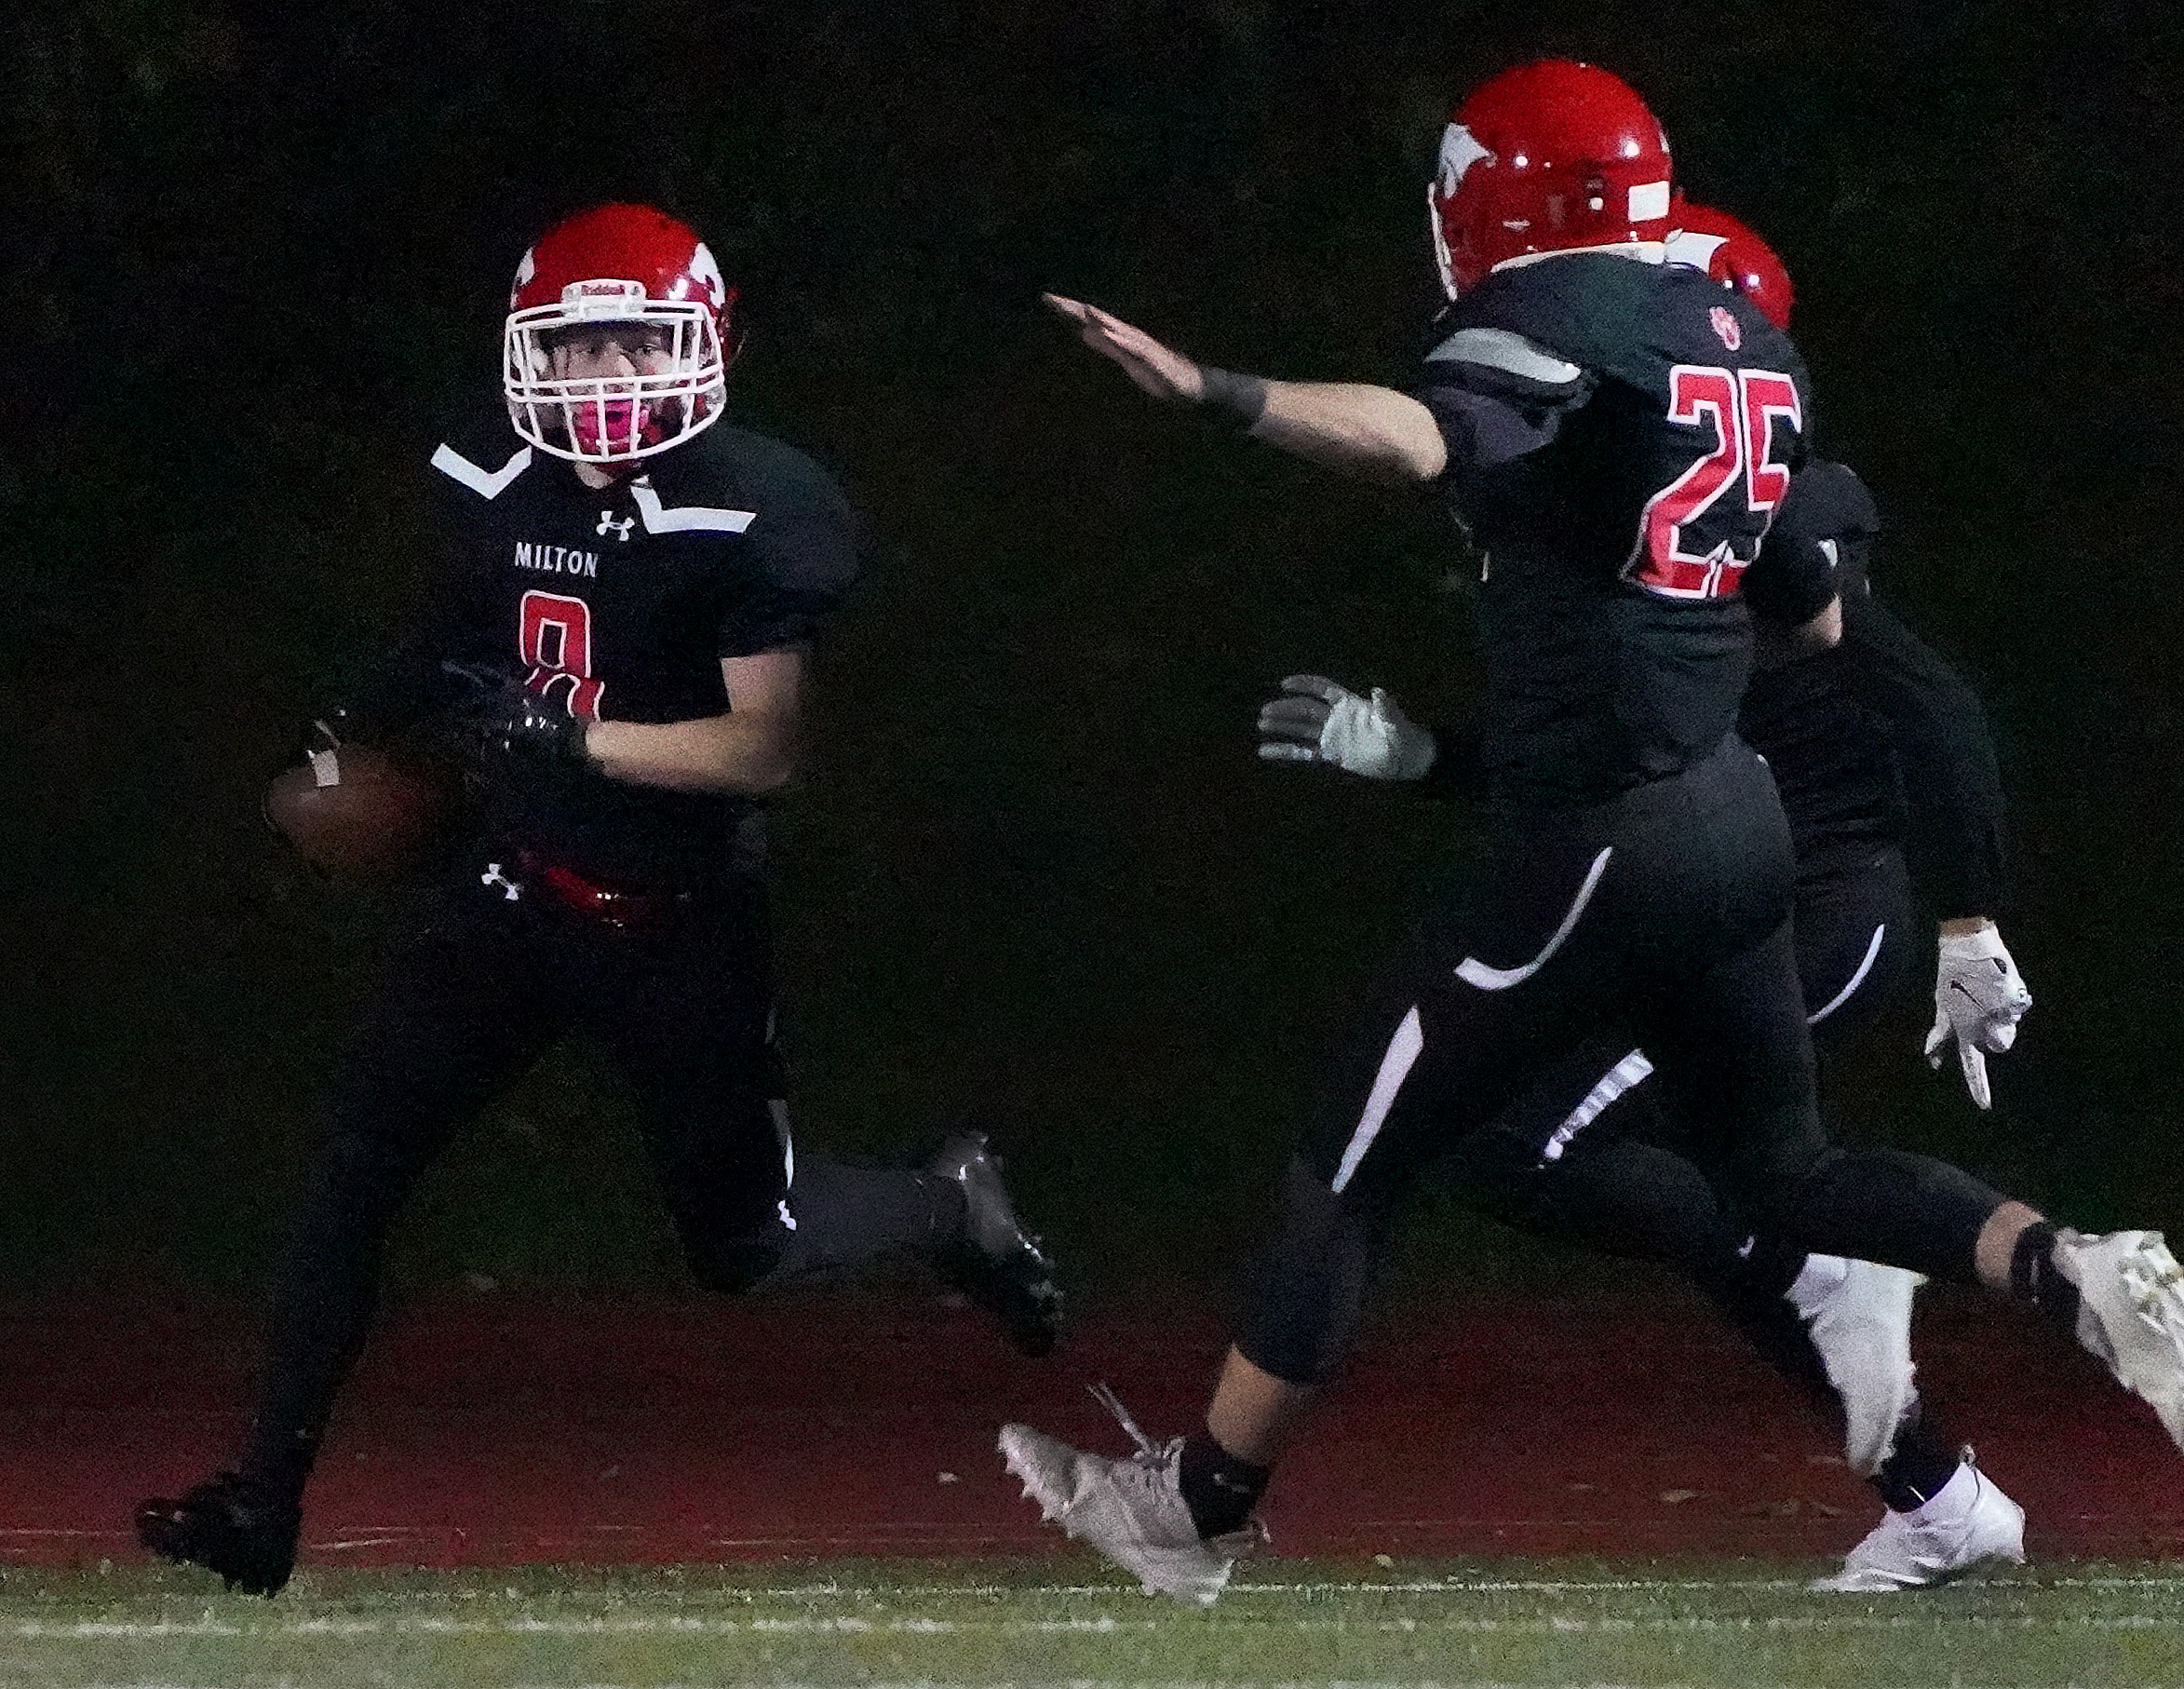 Suite Sports: PHOTO GALLERY: Hingham vs Central Catholic and BC